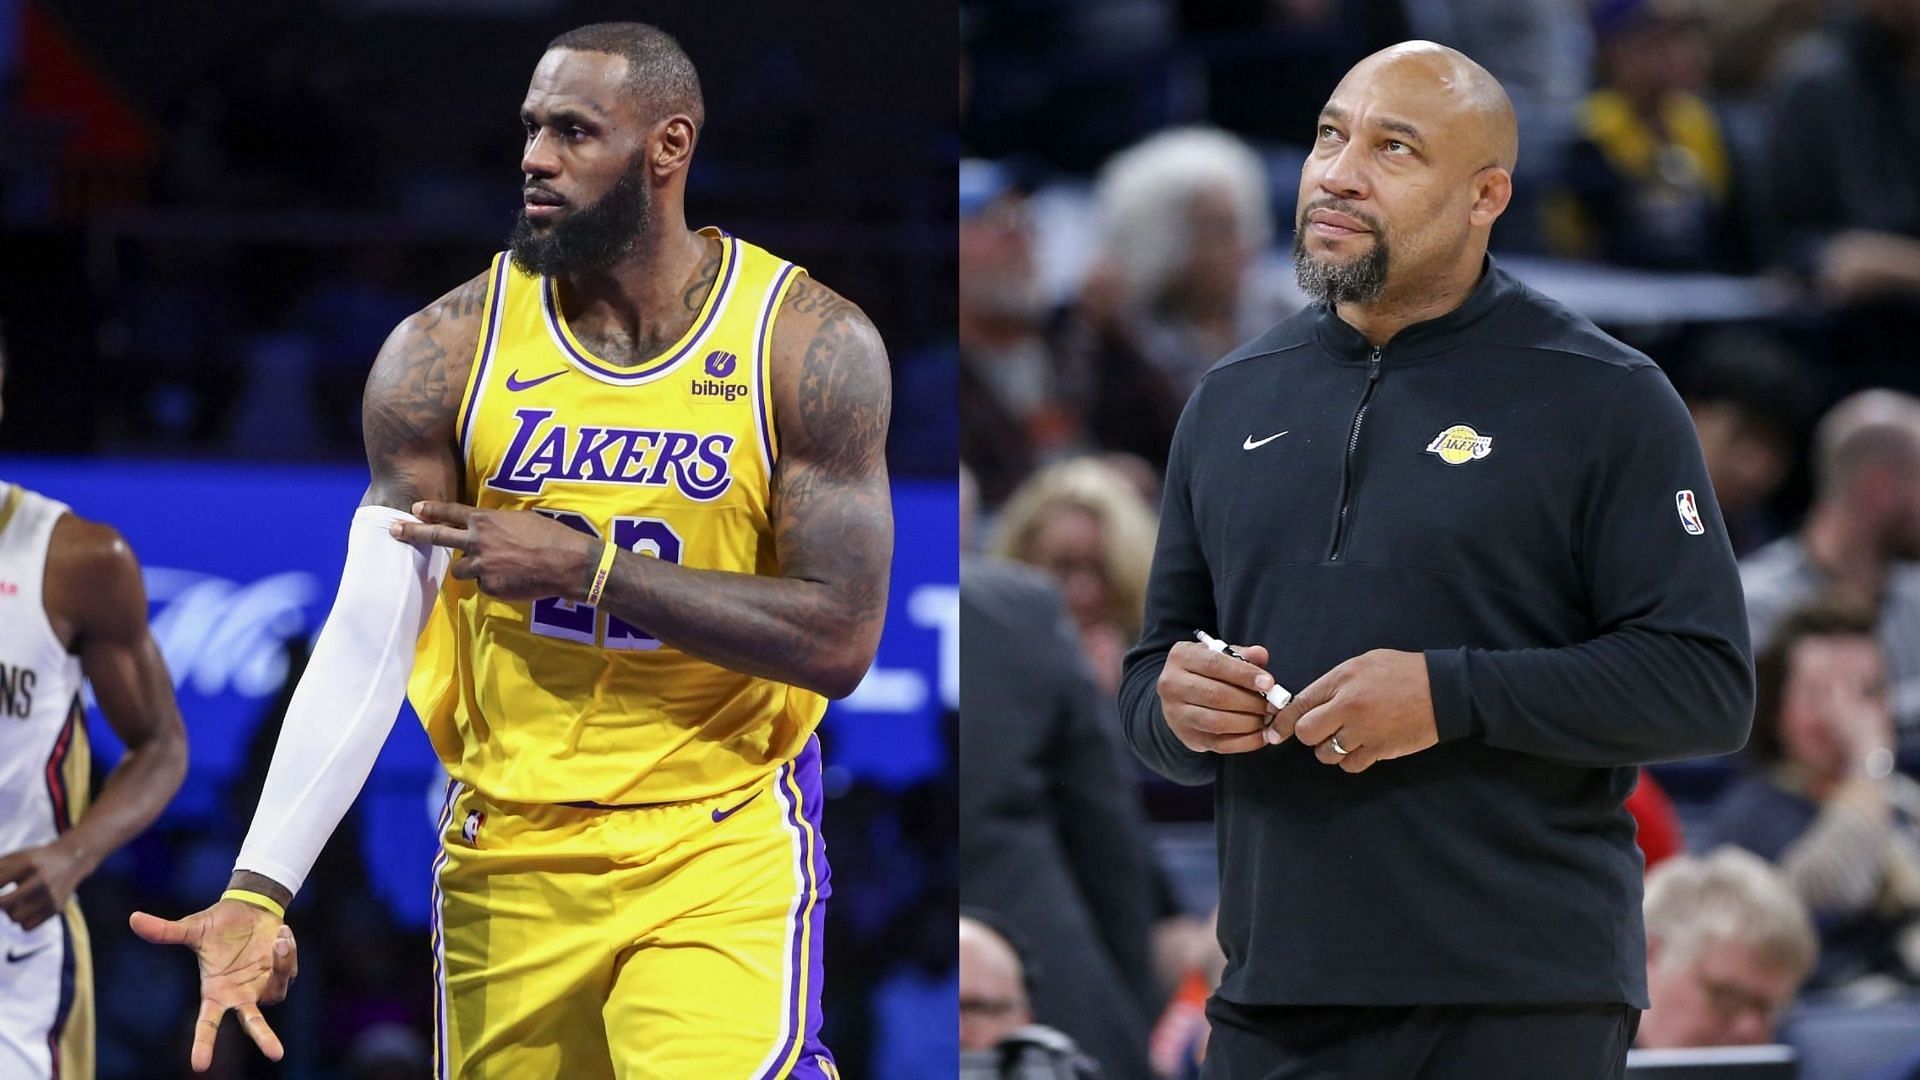 Lakers Head Coach Darvin Ham think LeBron James is an MVP candidate this season